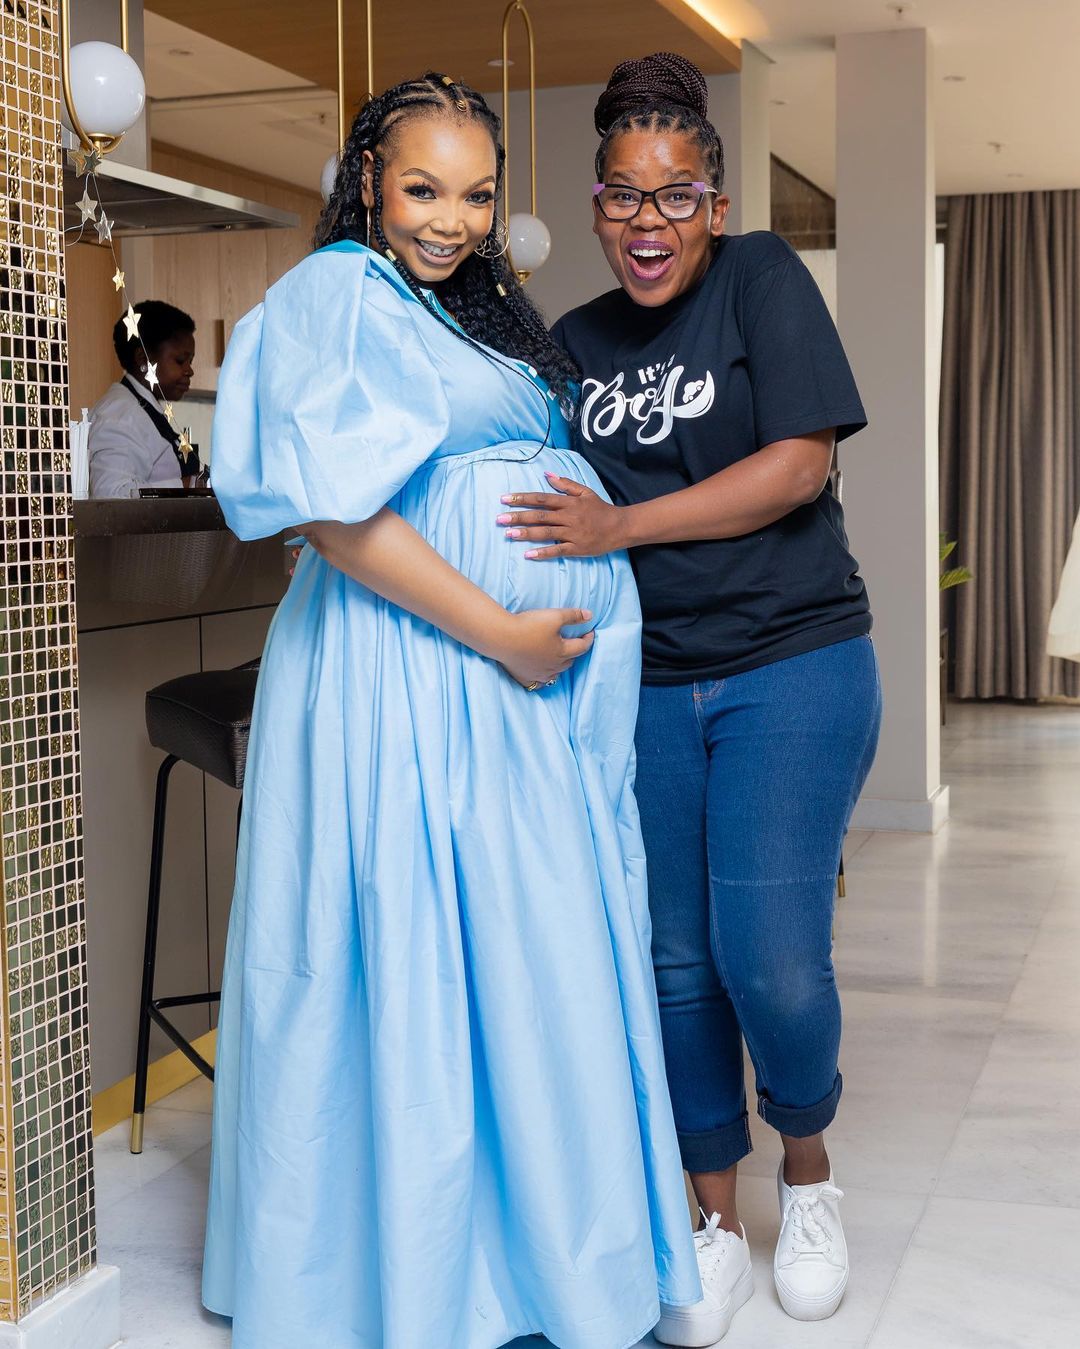 Thembisa Mdoda on becoming pregnant after the age of 40